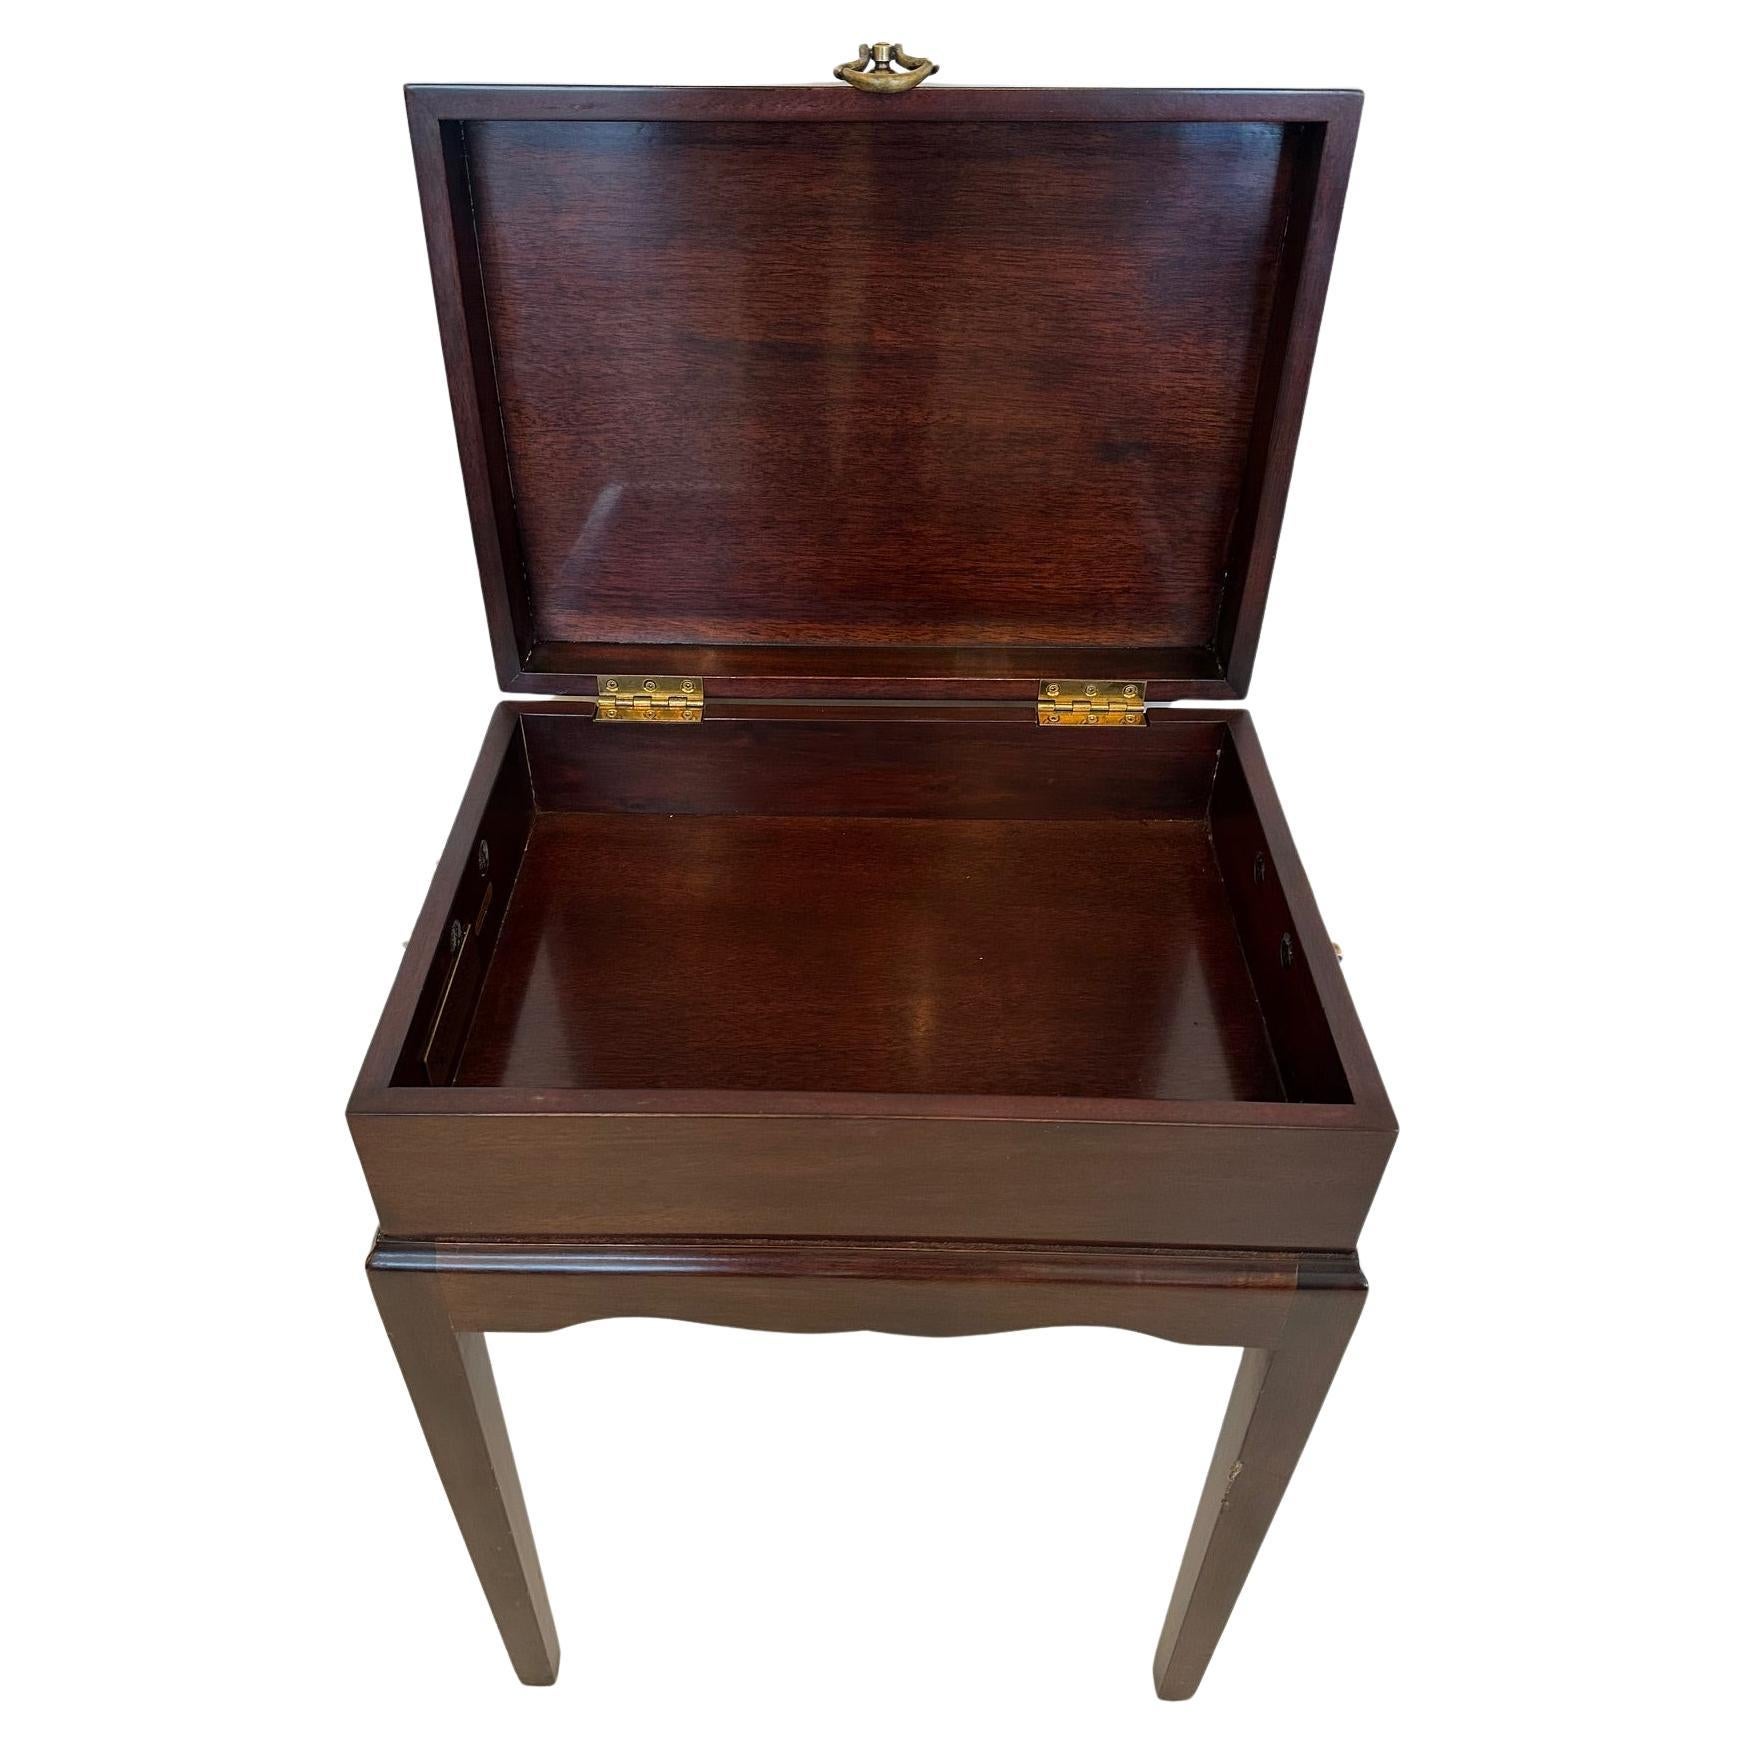 Handsome mahogany box on stand having inlaid decorative nautilus shell on tops and brass handles.  Makes a nifty end table with storage inside. 